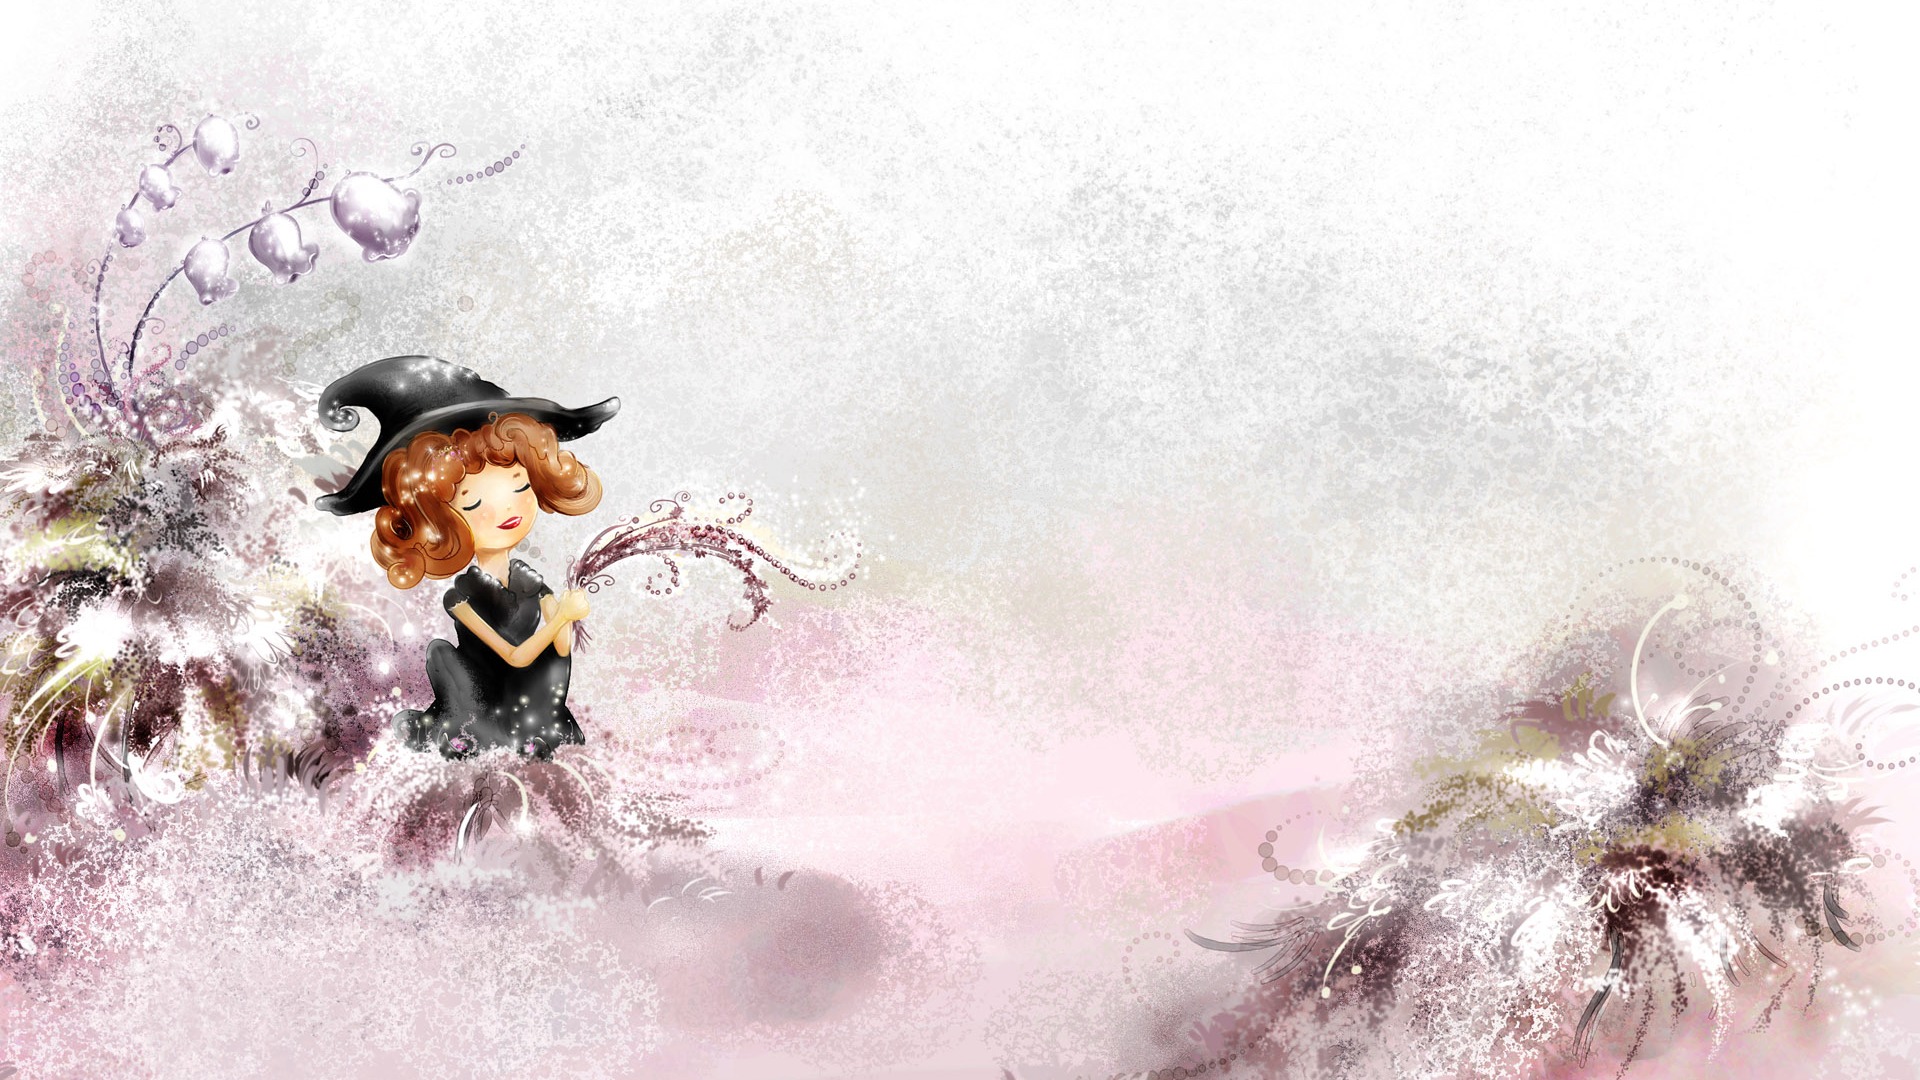 Hand-painted Fantasy Wallpapers (1) #6 - 1920x1080